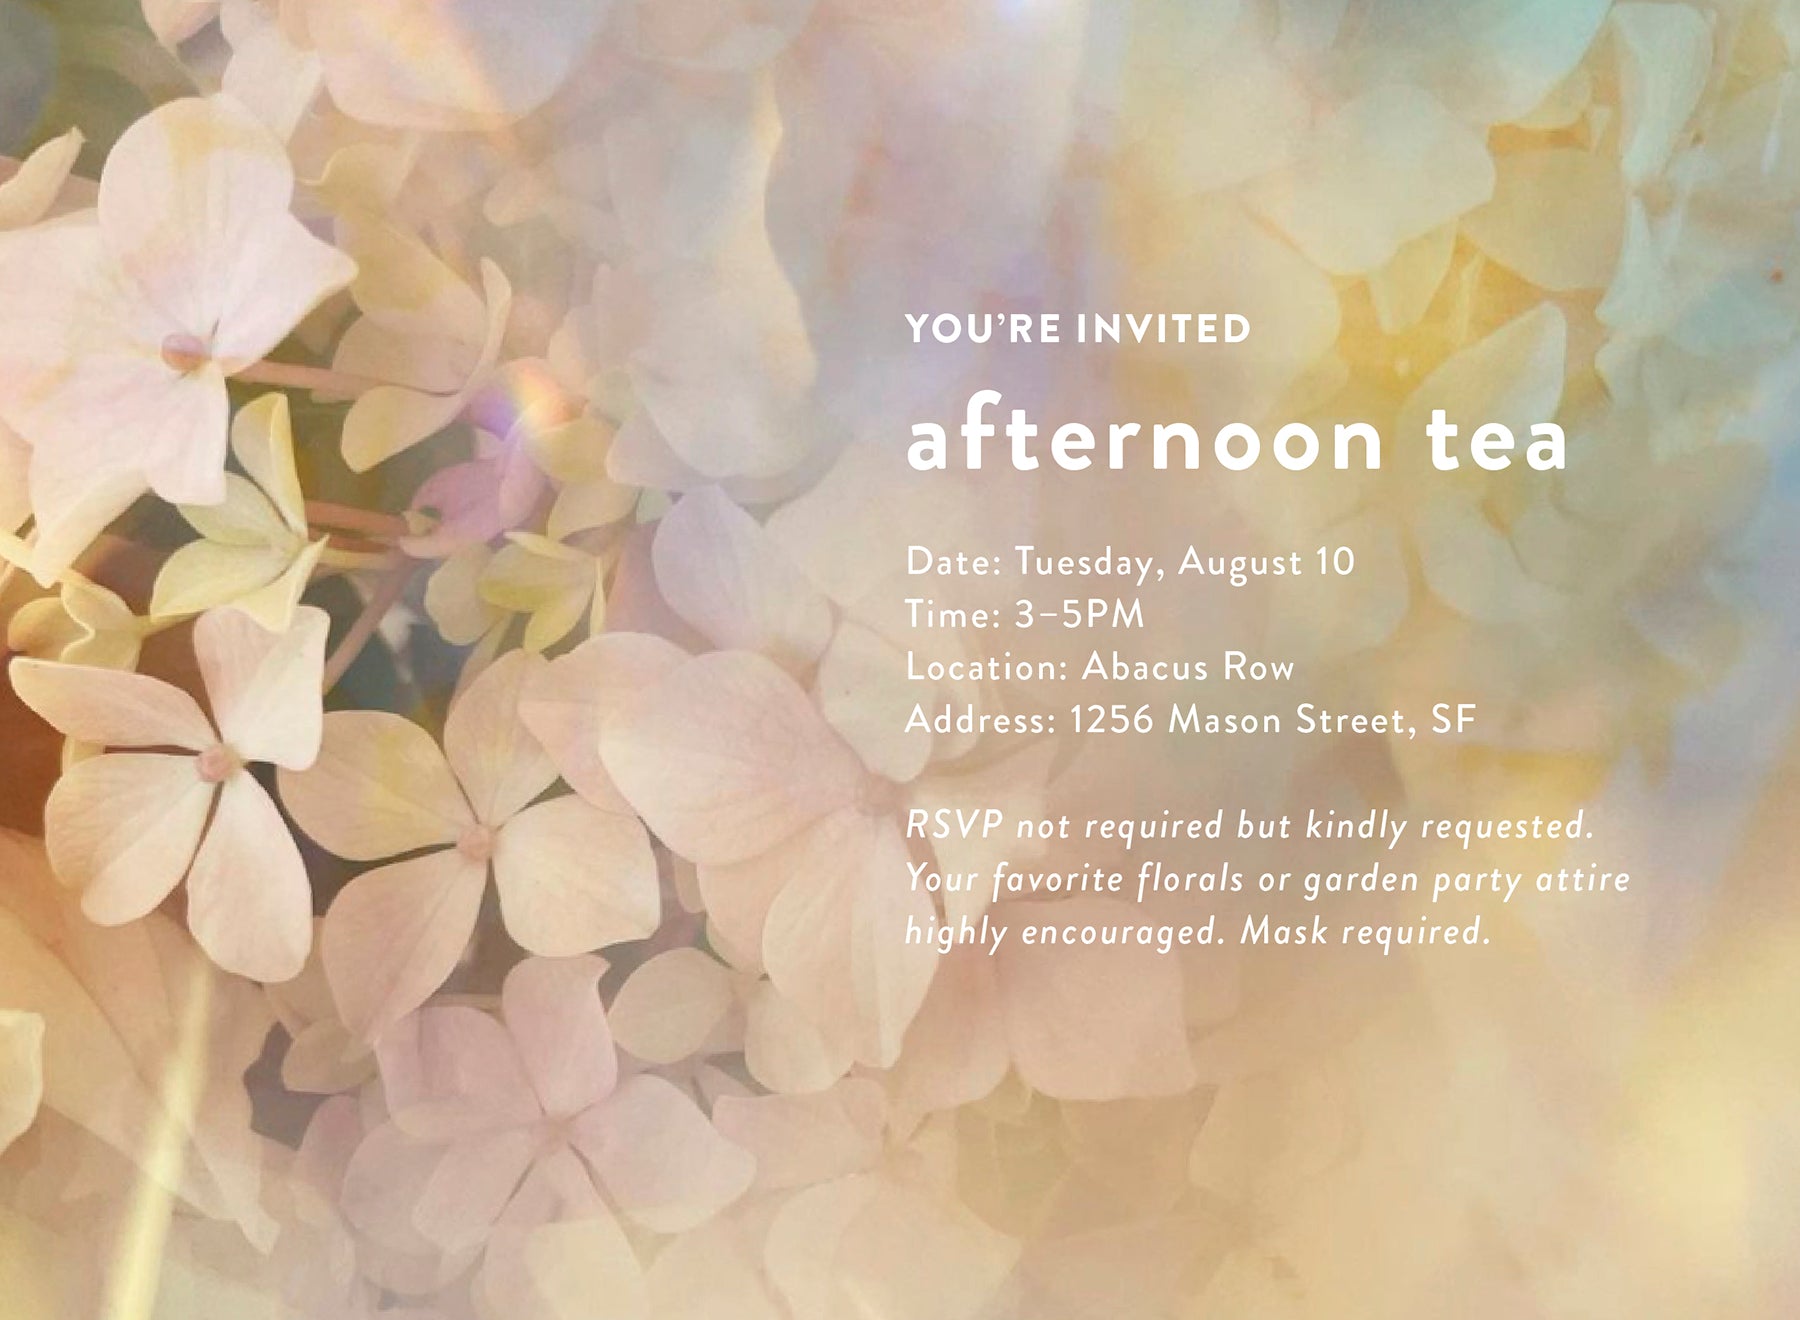 Abacus Row, Collection Launch Afternoon Tea invitation, August 10, 3-5pm